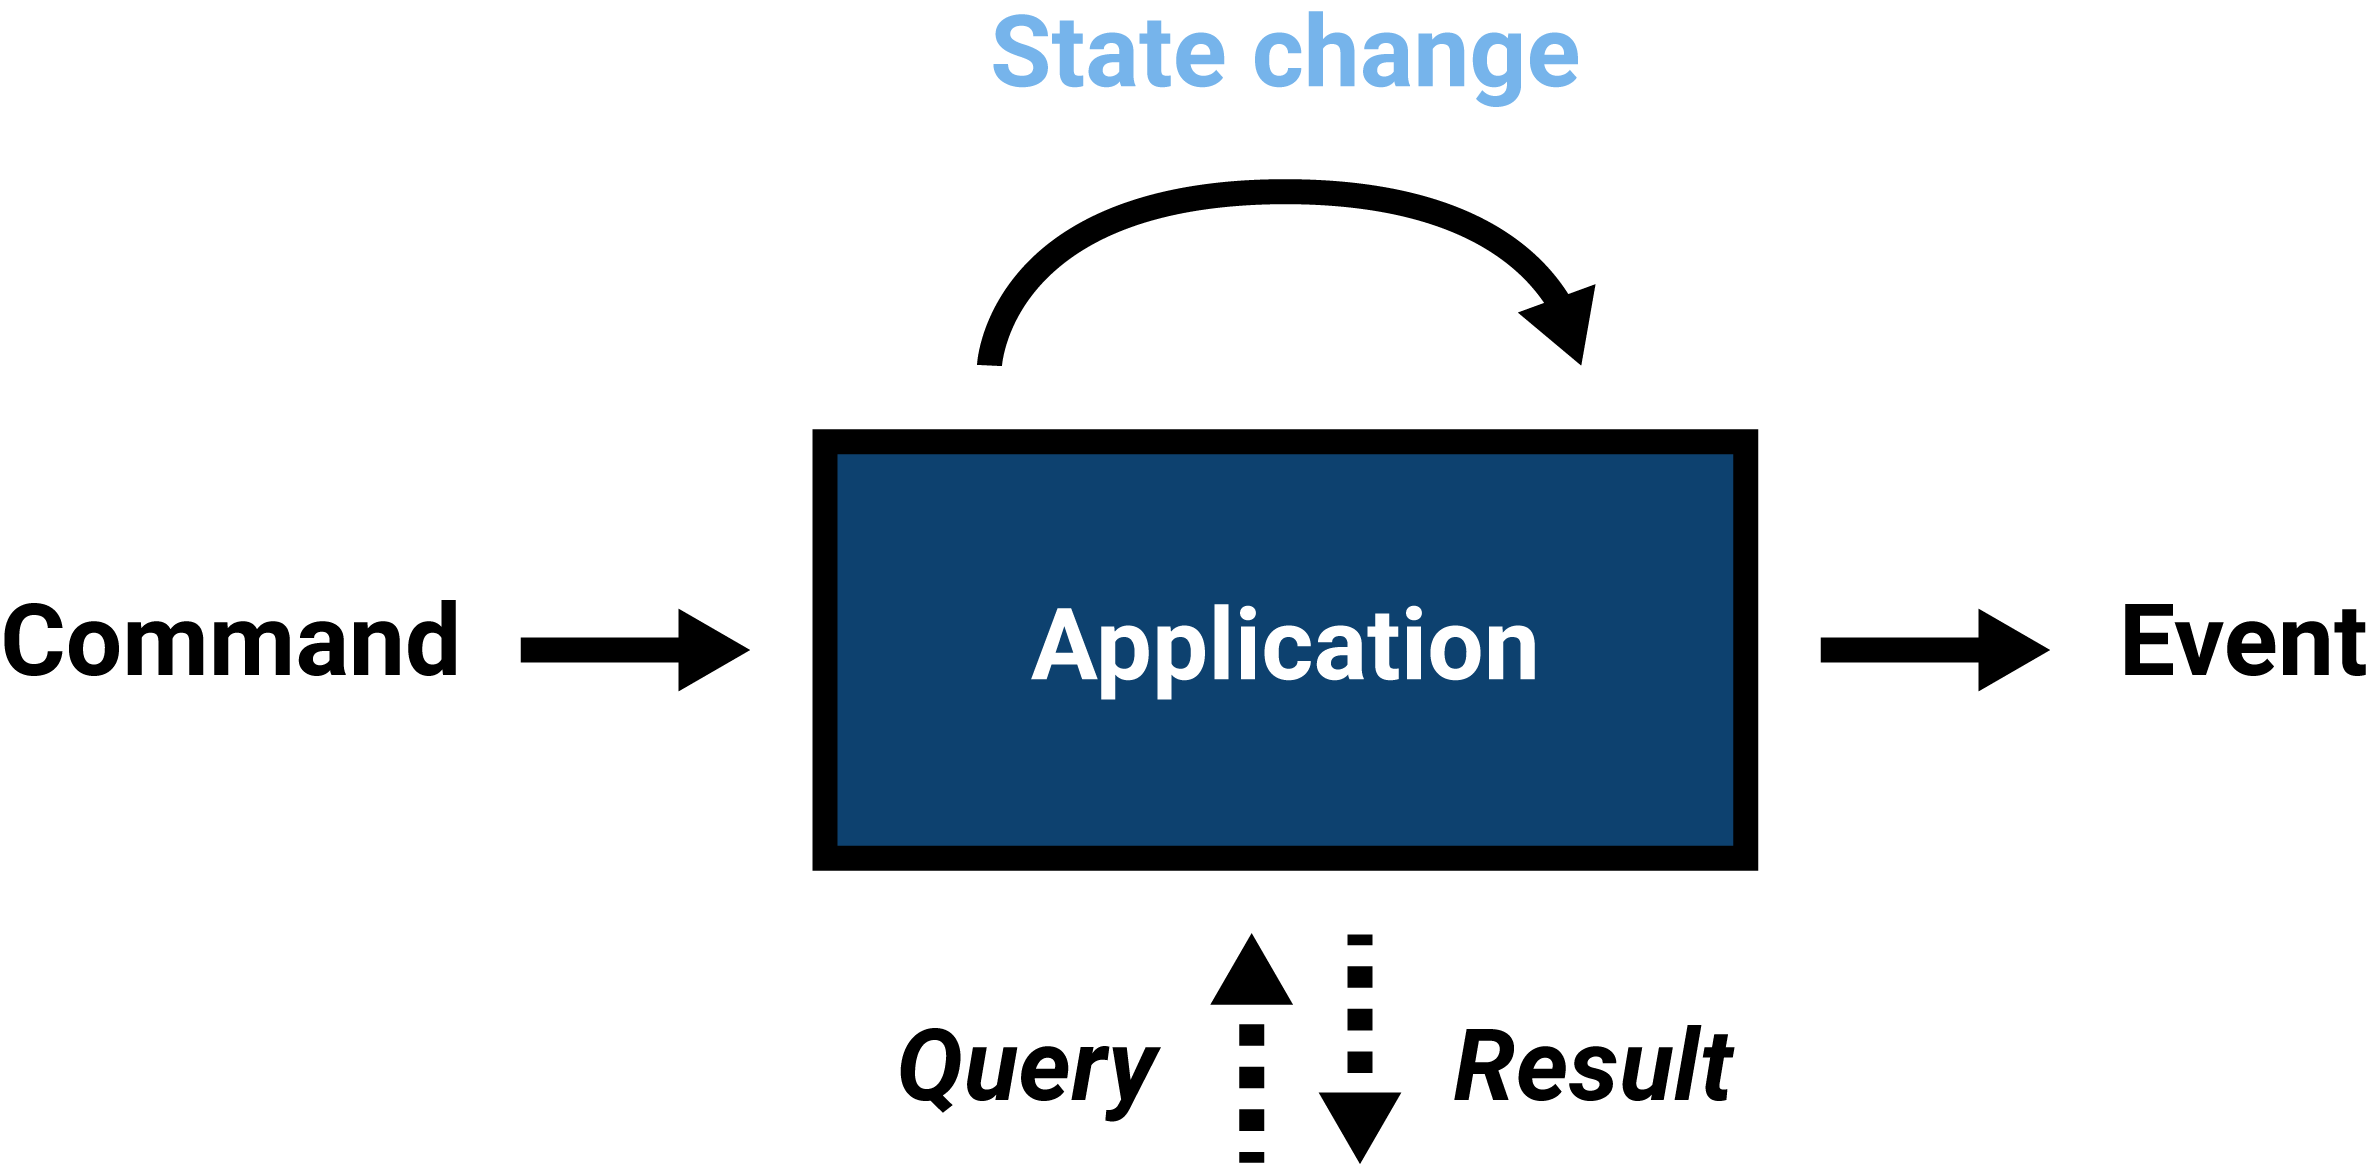 Commands can result in changes in application state, which can cause events to be emitted. Queries are requests regarding current state.